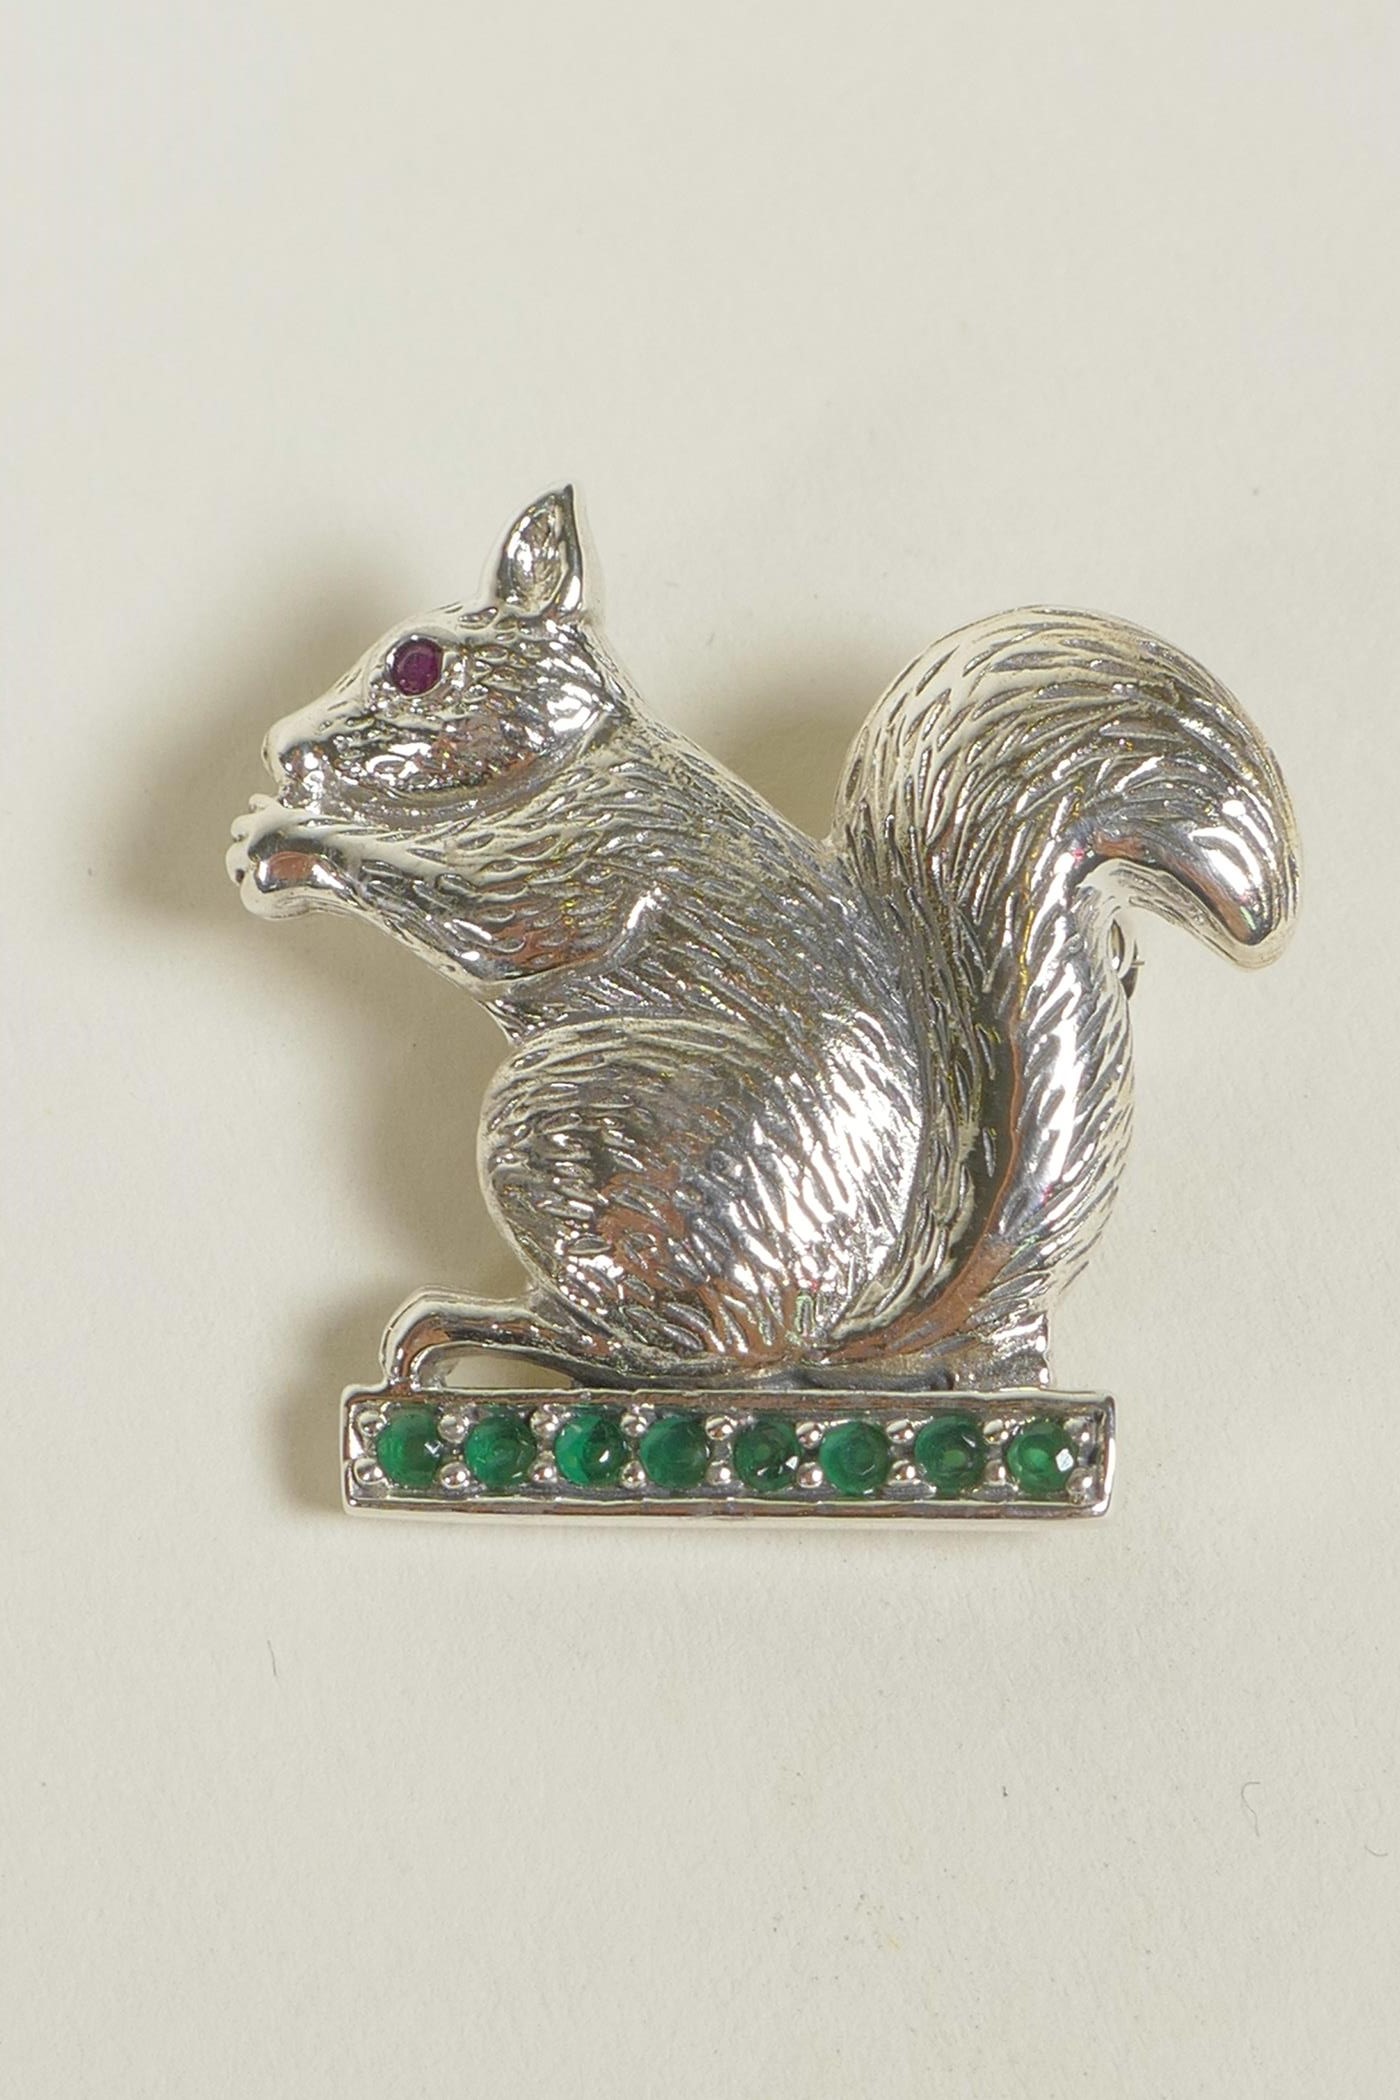 A 925 silver brooch in the form of a squirrel, 1" high